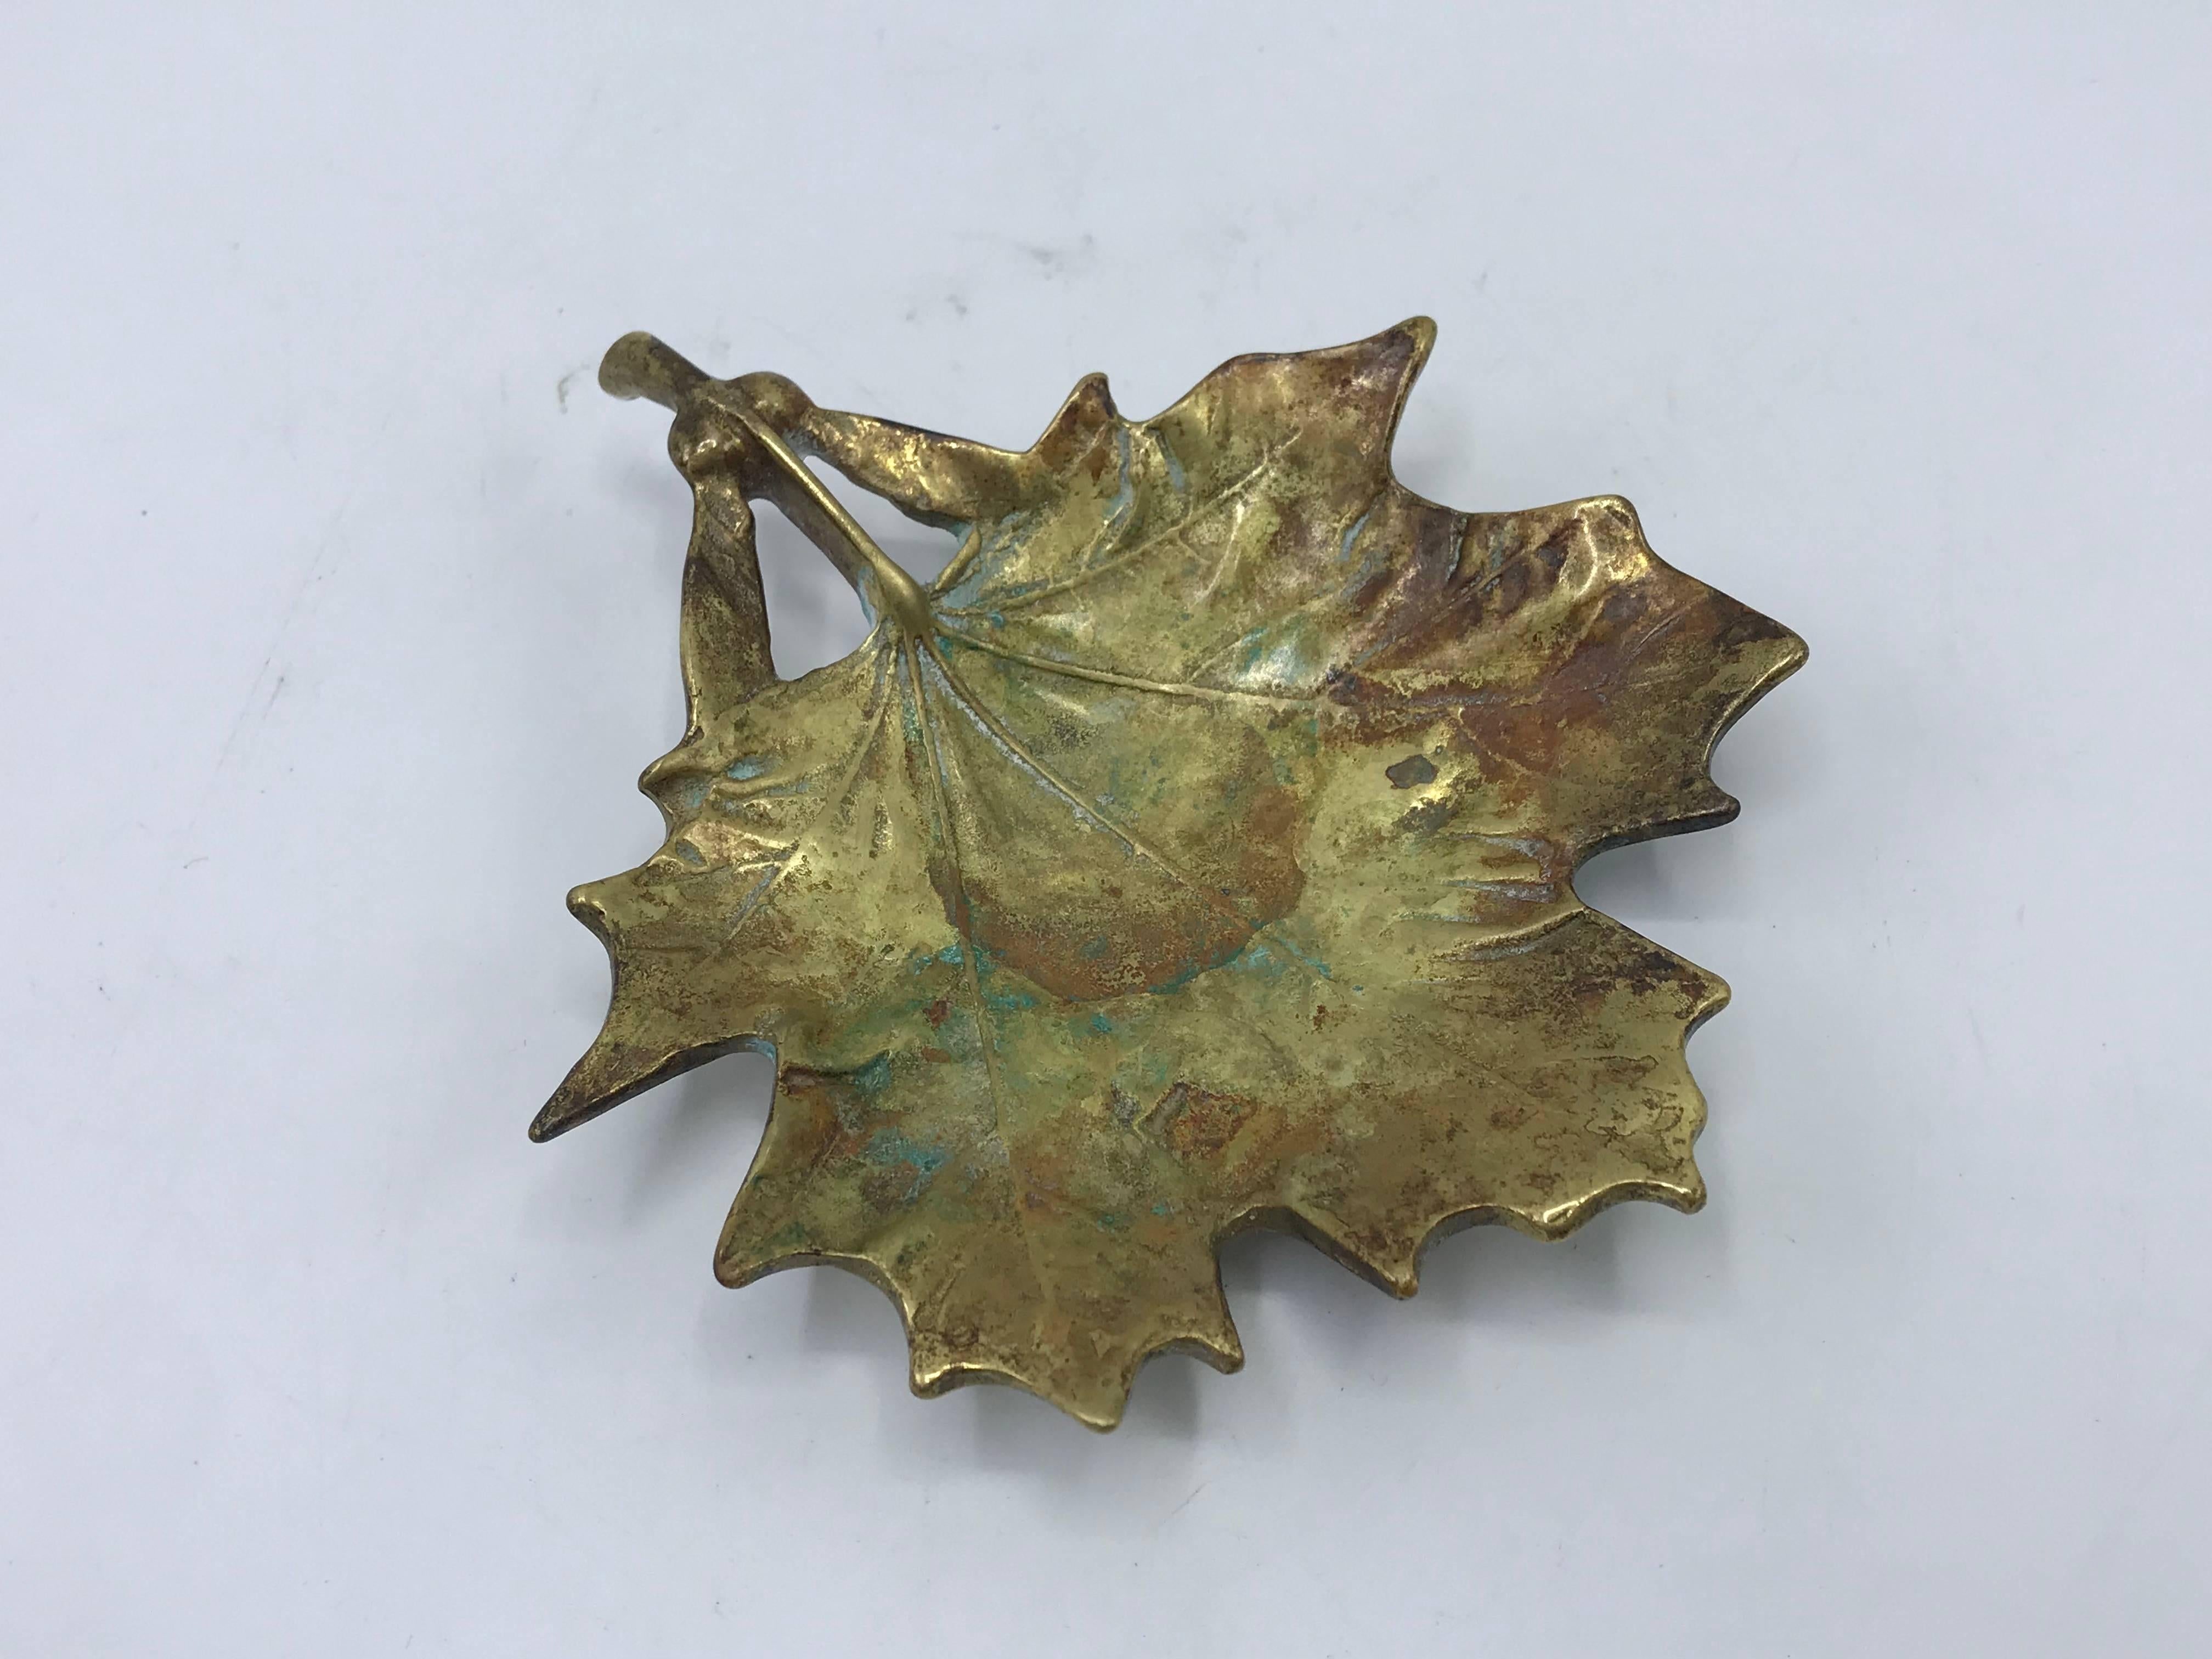 Offered is a stunning, 1950s Virginia Metalcrafters solid-brass sugar maple leaf sculpture. Marked on backside with Virginia Metalcrafters signature 'VMC' stamp, see last photo. Heavy. Beautiful all-over patina, can be polished by buyer.

“Since